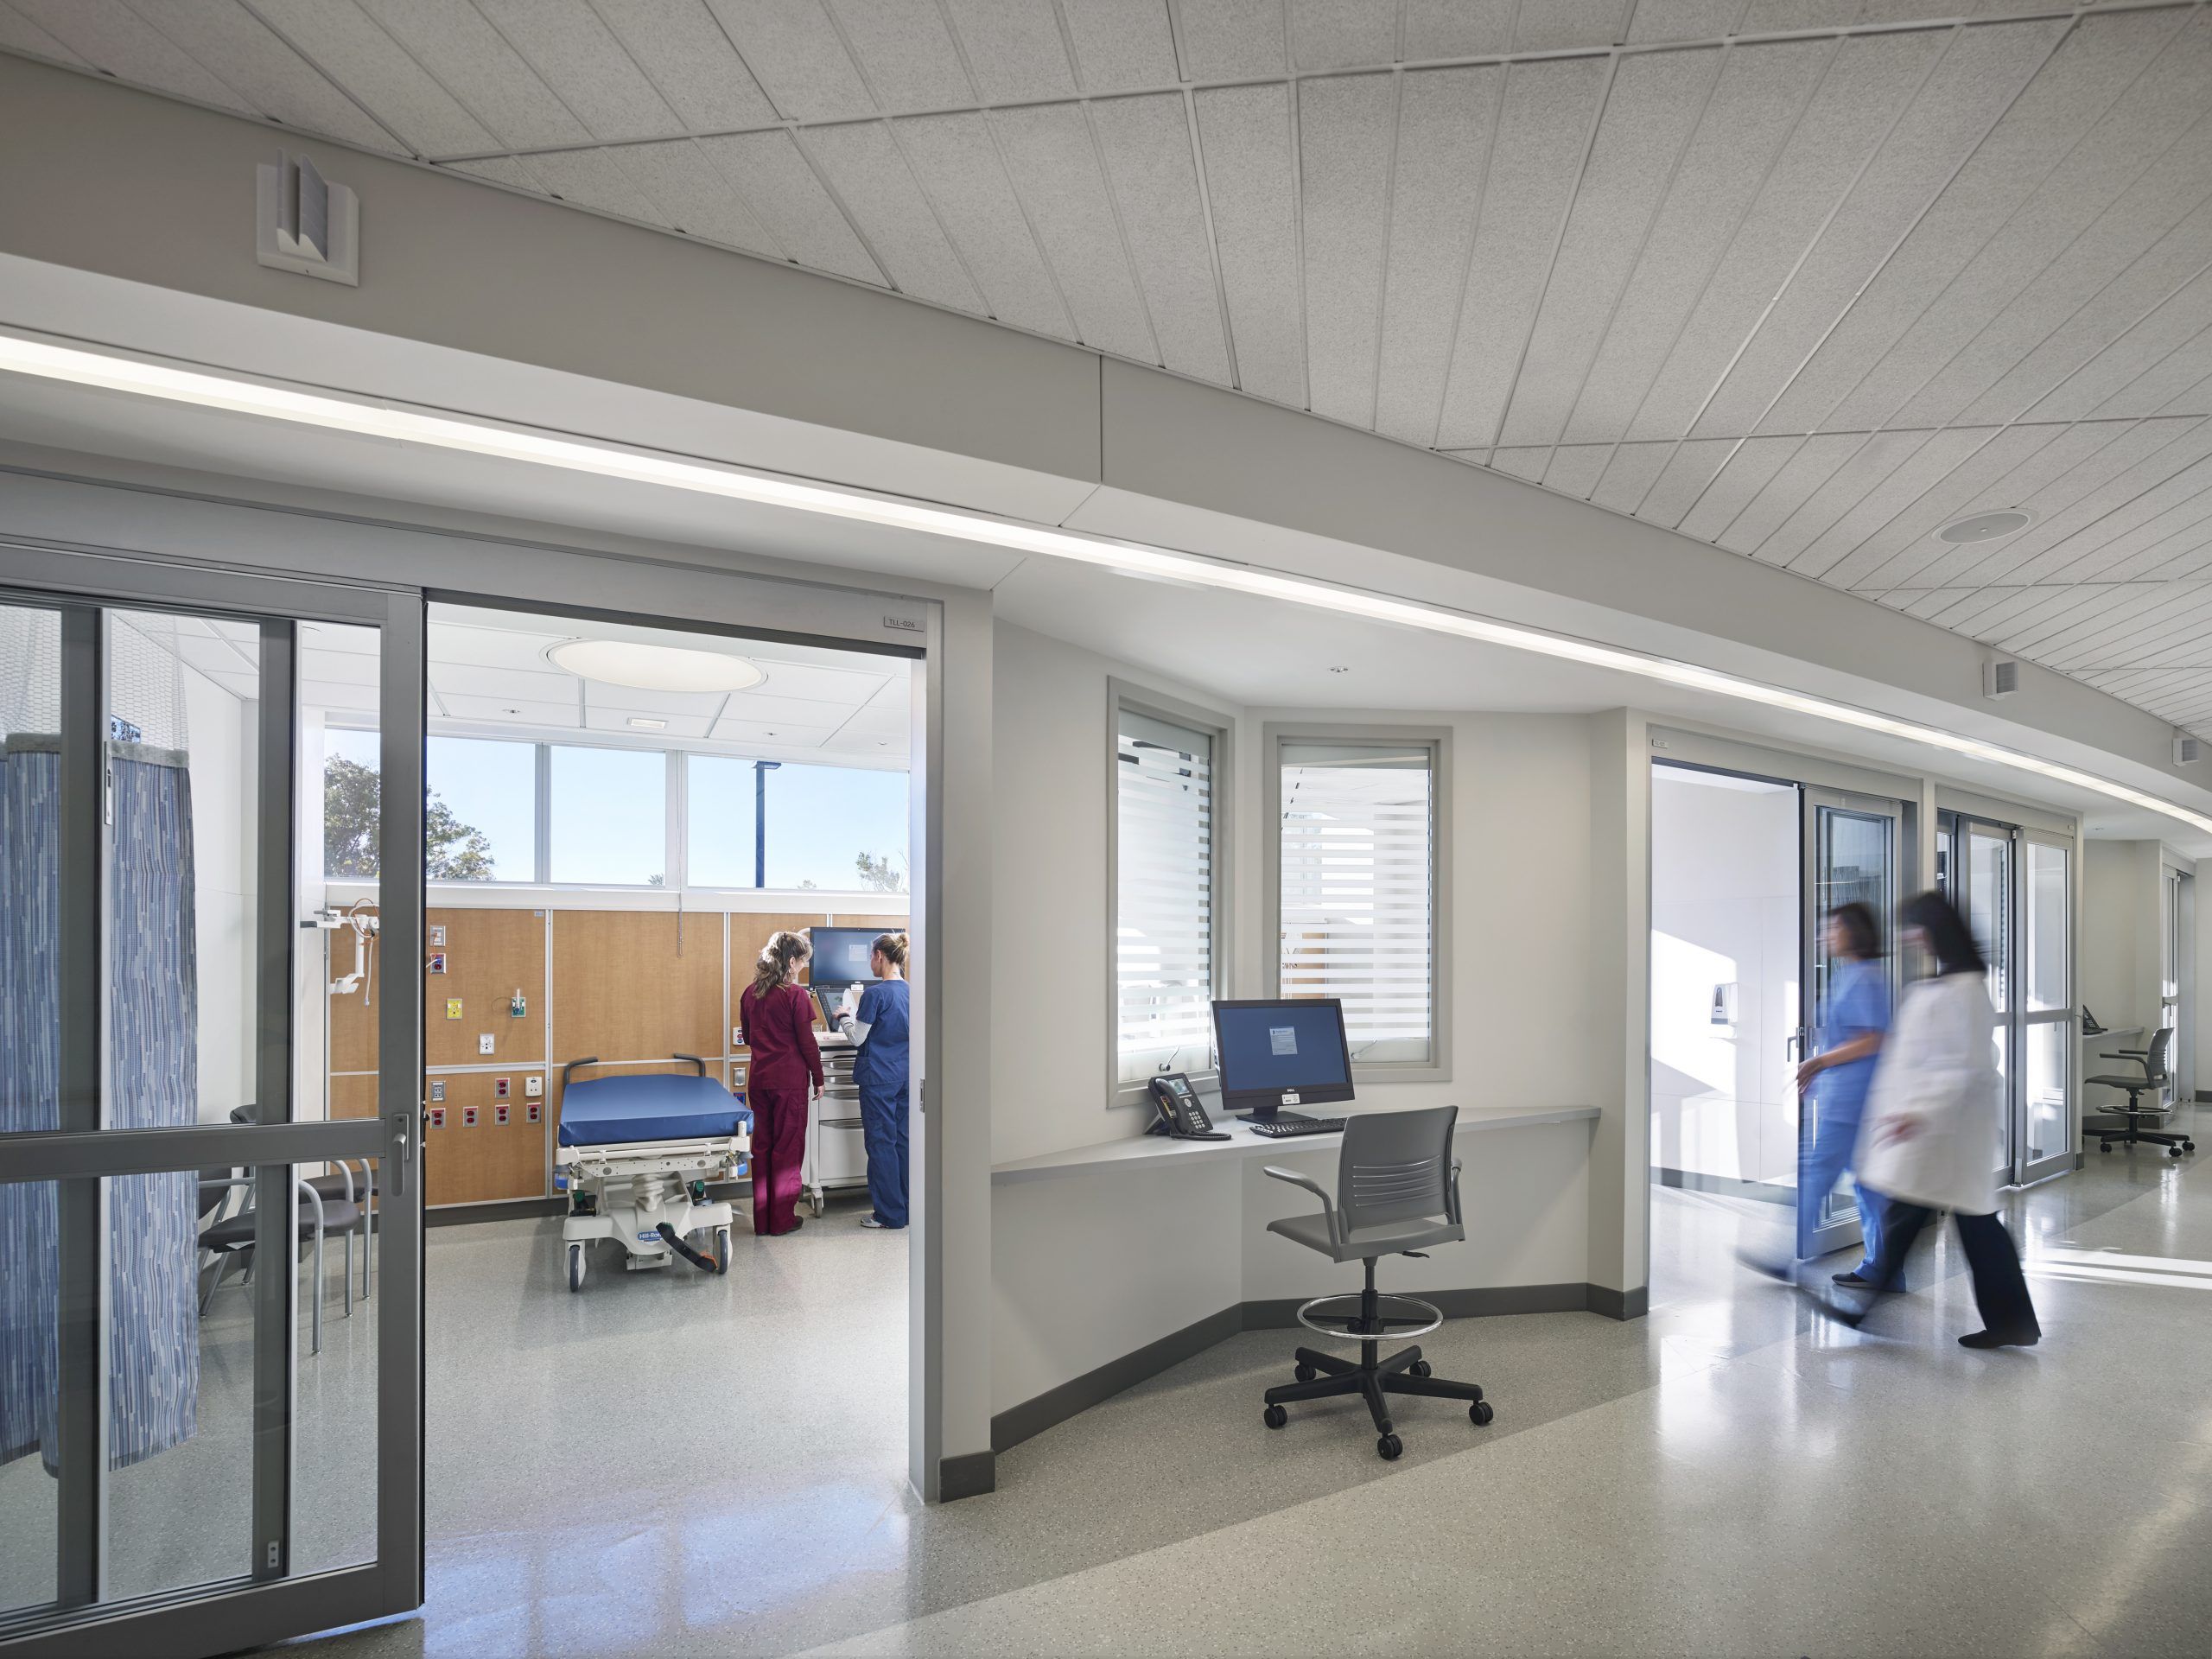 View of a nurses' station outside a patient room with clerestory windows and natural light